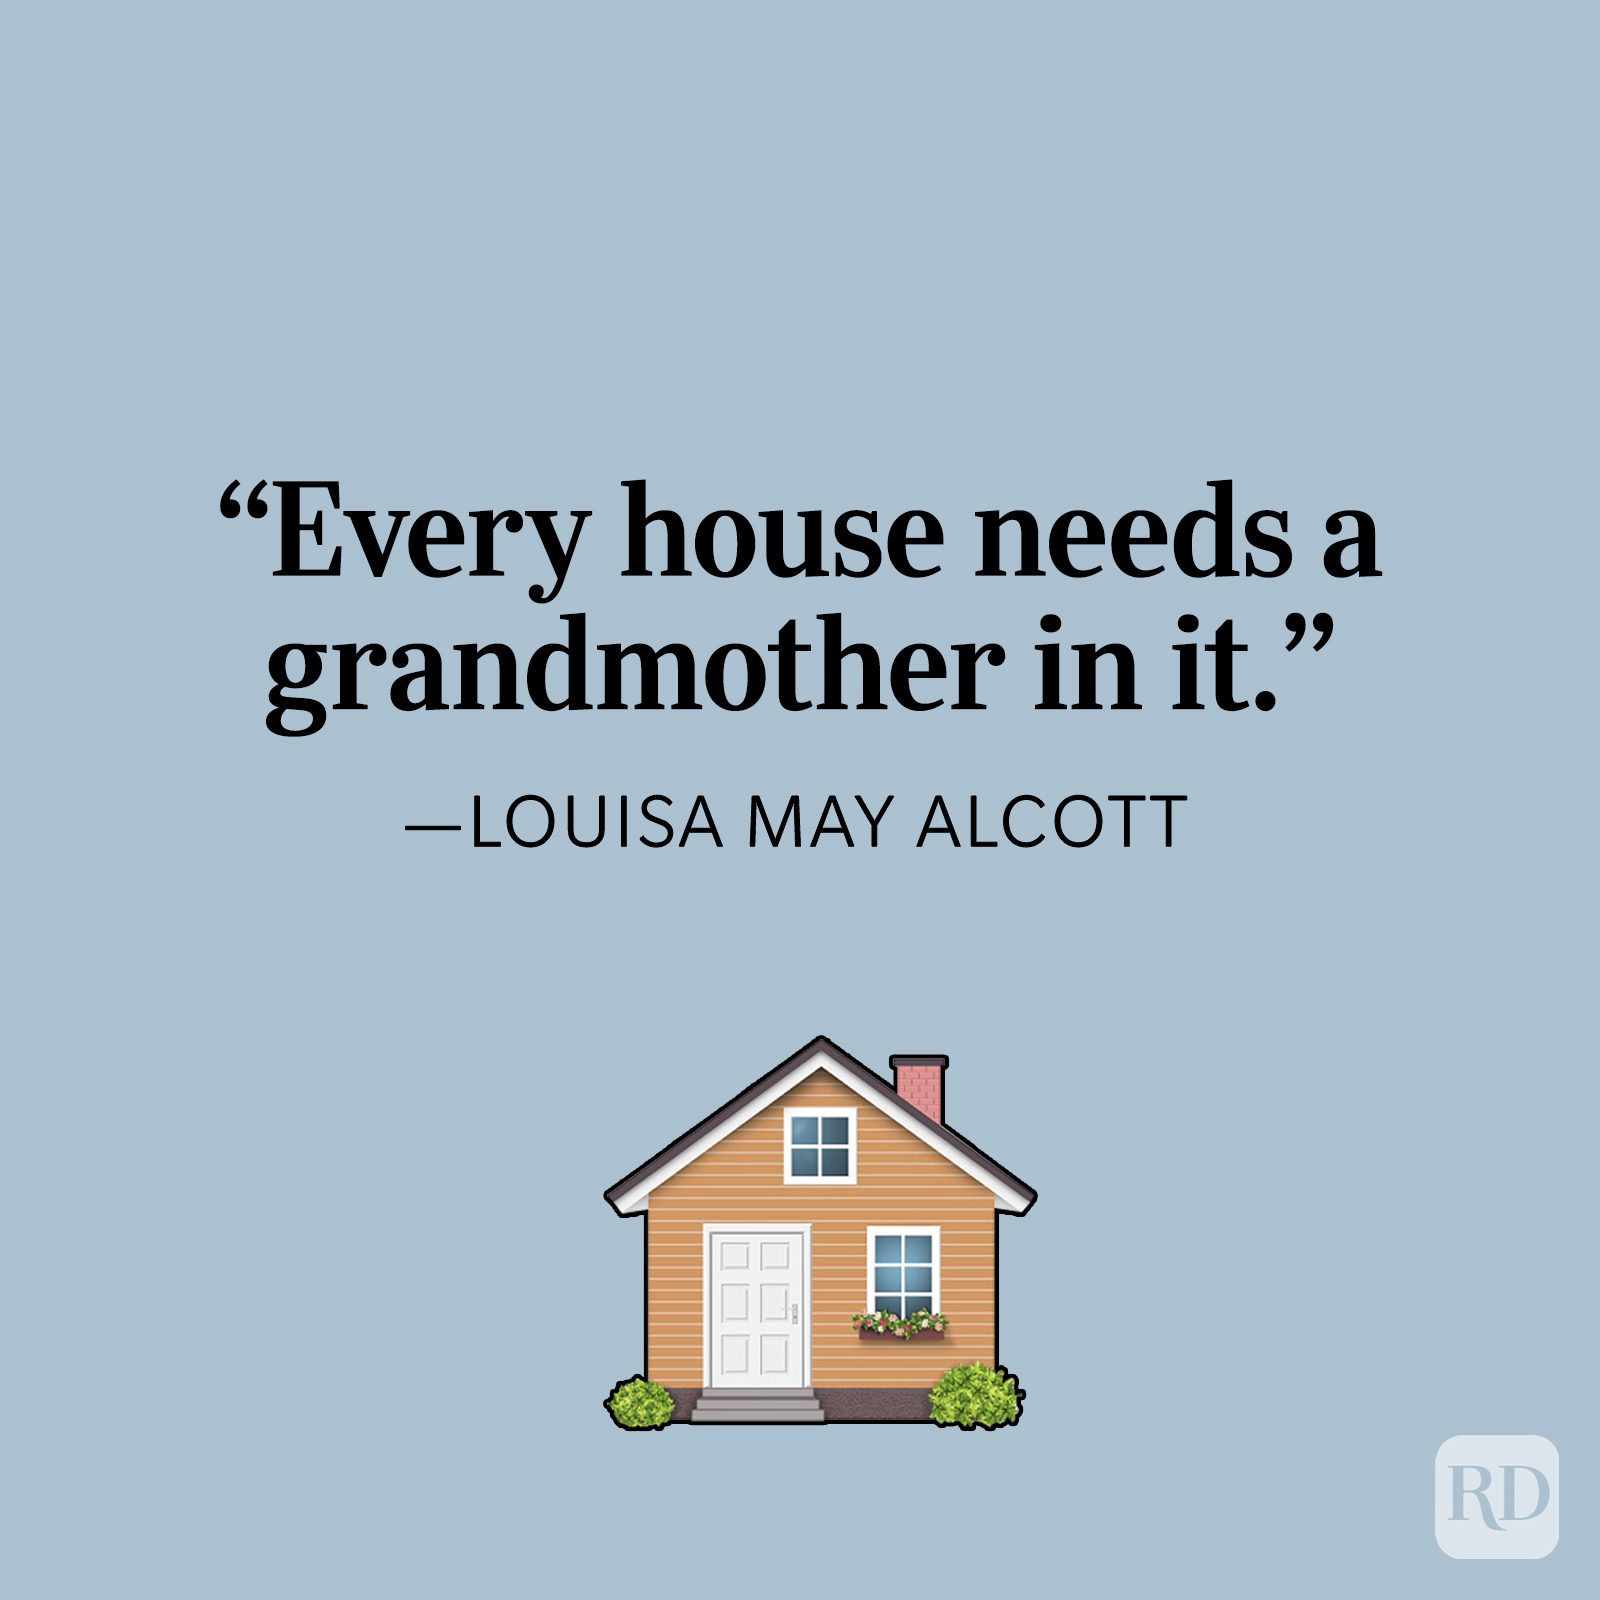 40 Best Grandma Quotes To Share With Grammy In 2023